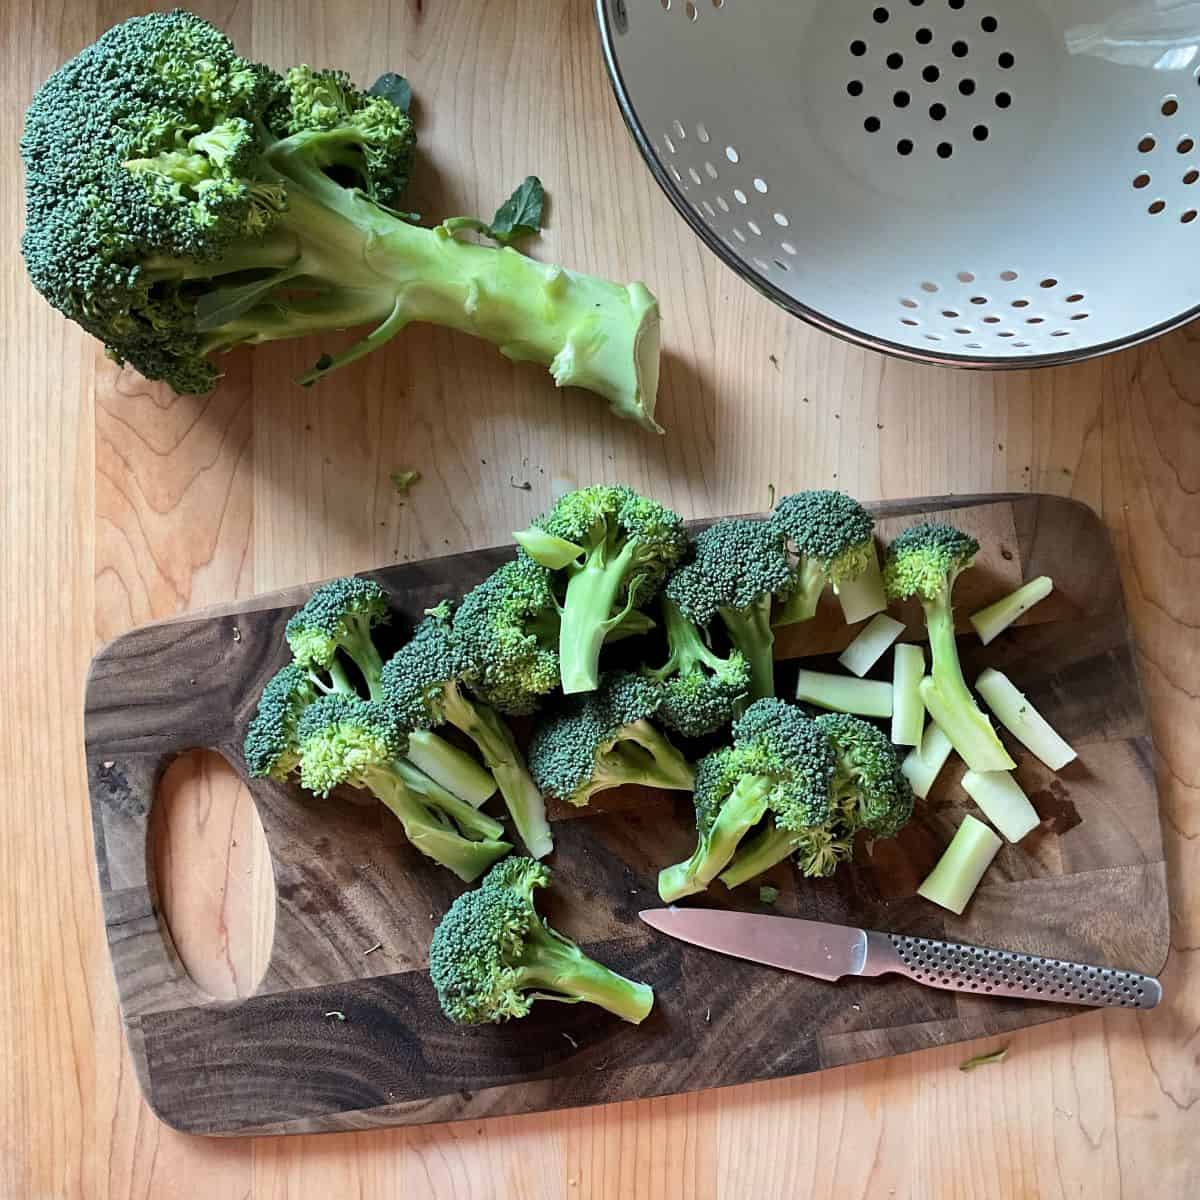 Trimmed and chopped broccoli on a baking sheet.